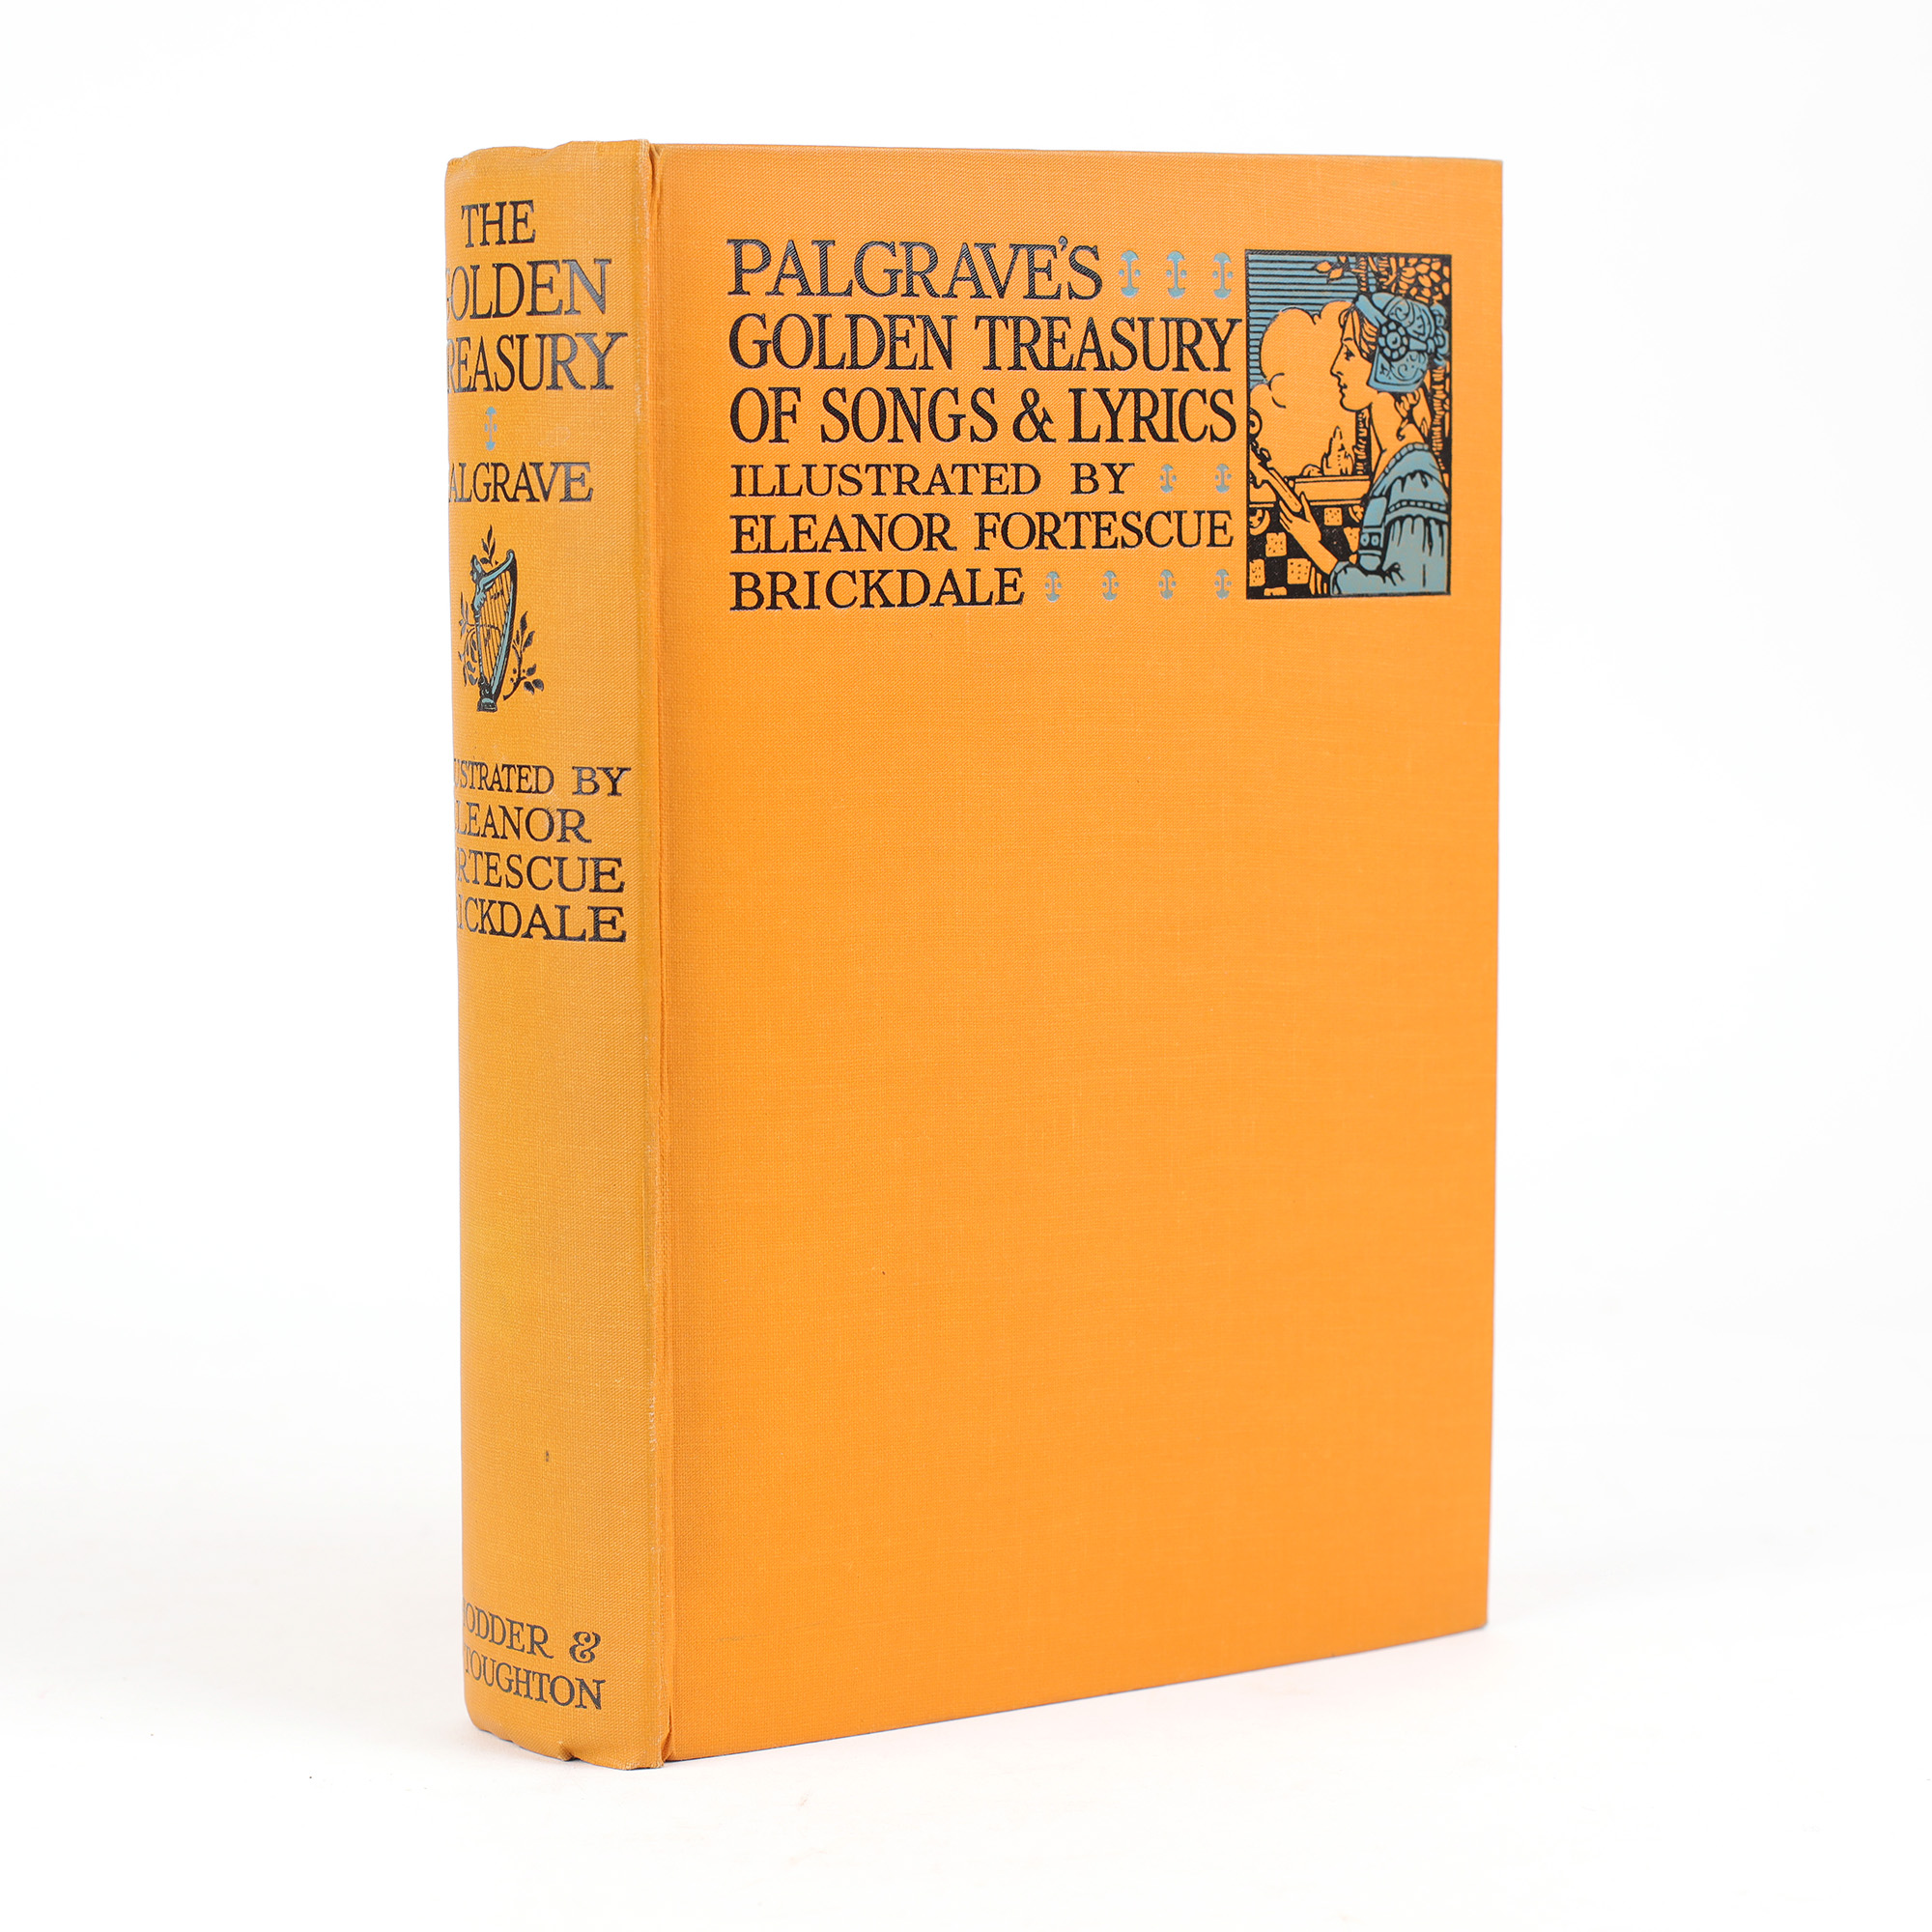 The golden treasury of American songs and lyrics . r, that